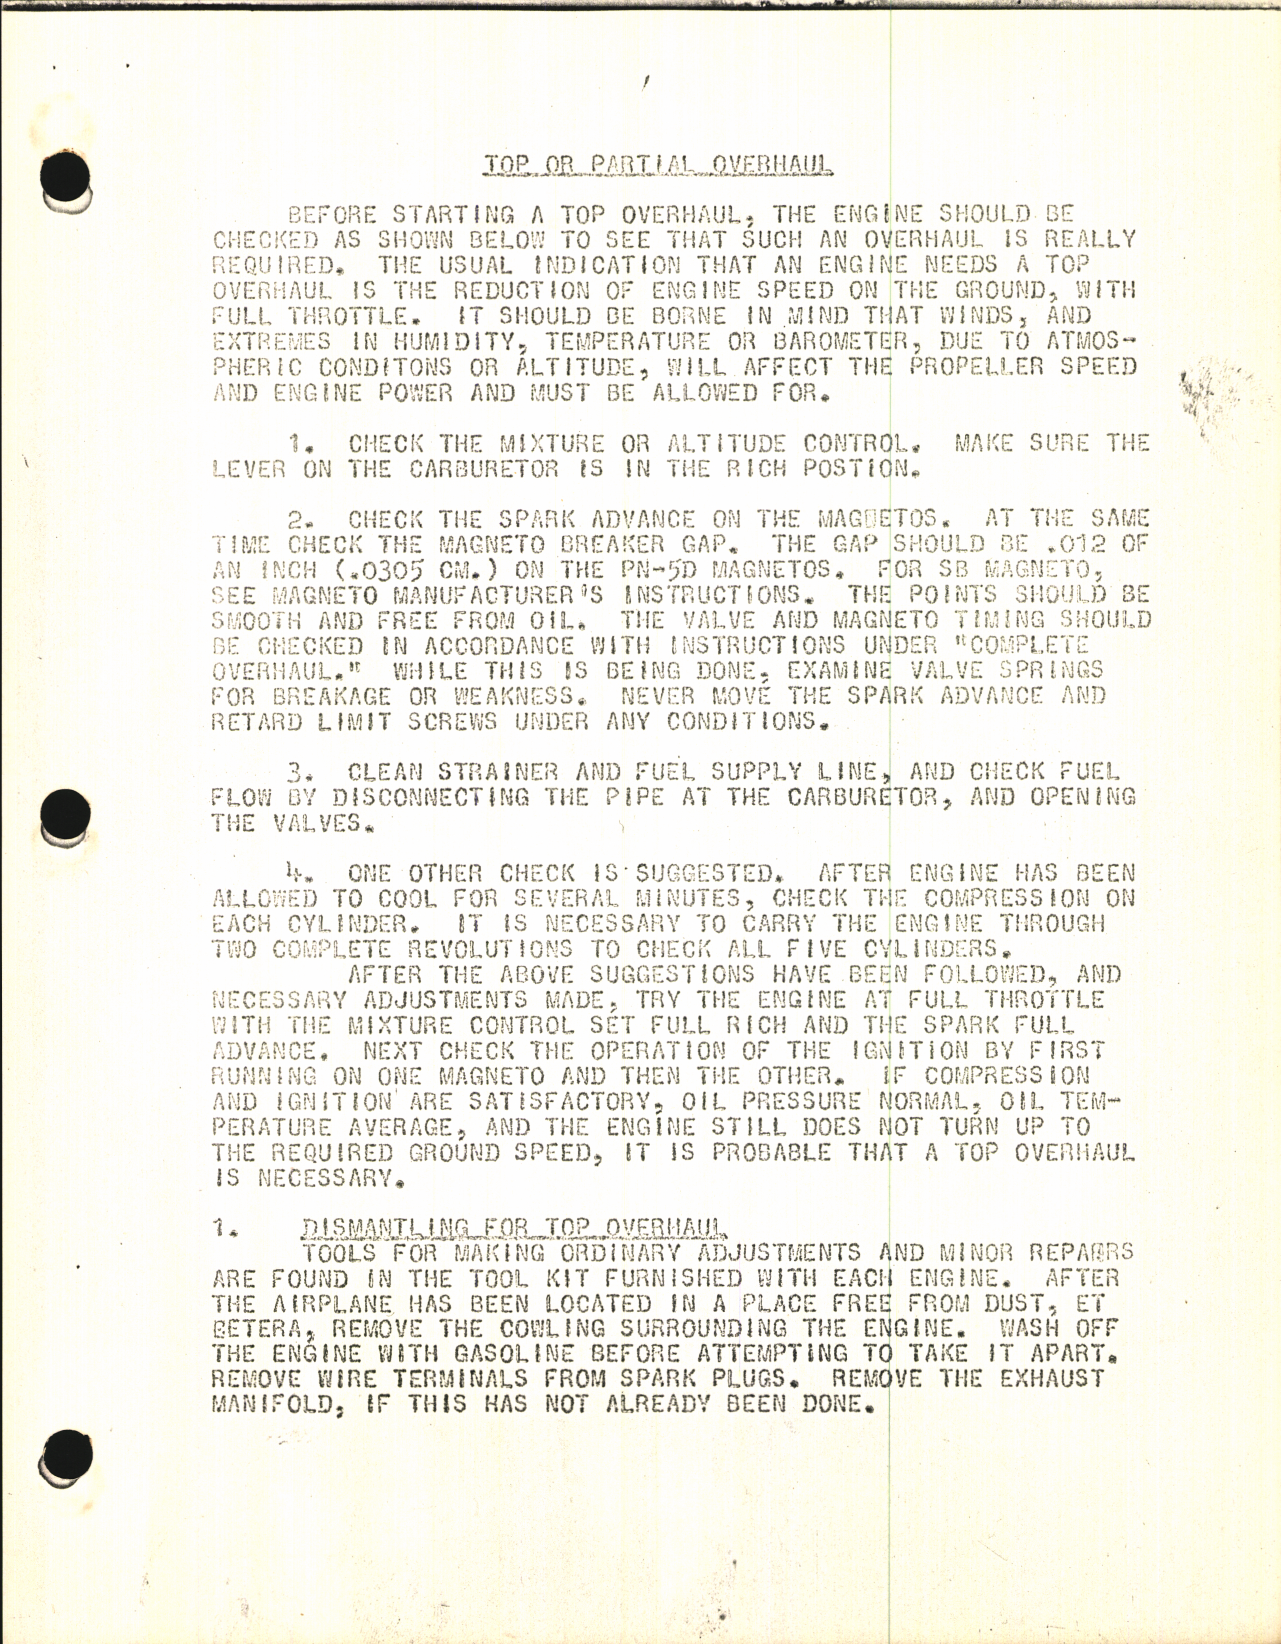 Sample page 5 from AirCorps Library document: Instructions for Overhaul for Kinner R-52, R-55, and R-53 Aircraft Engines